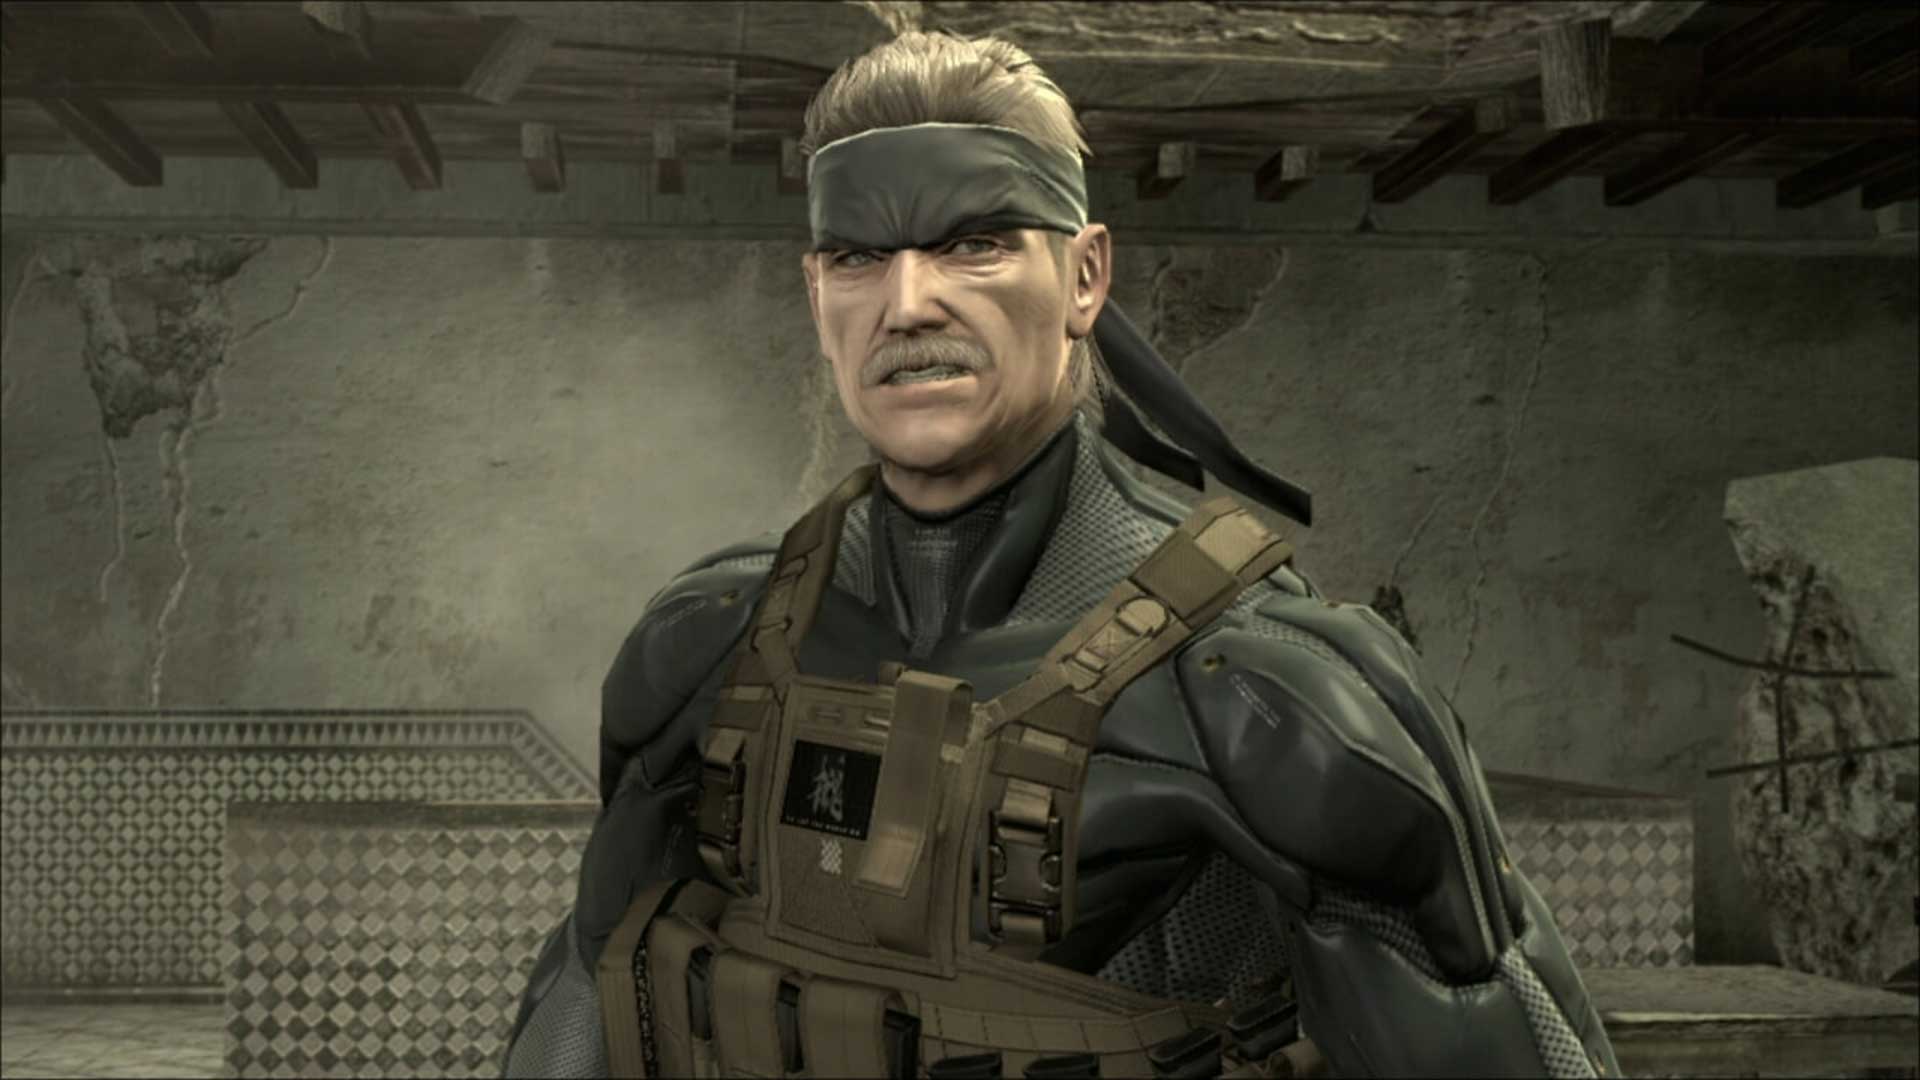 Metal Gear Solid 4 ran flawlessly on Xbox 360, says